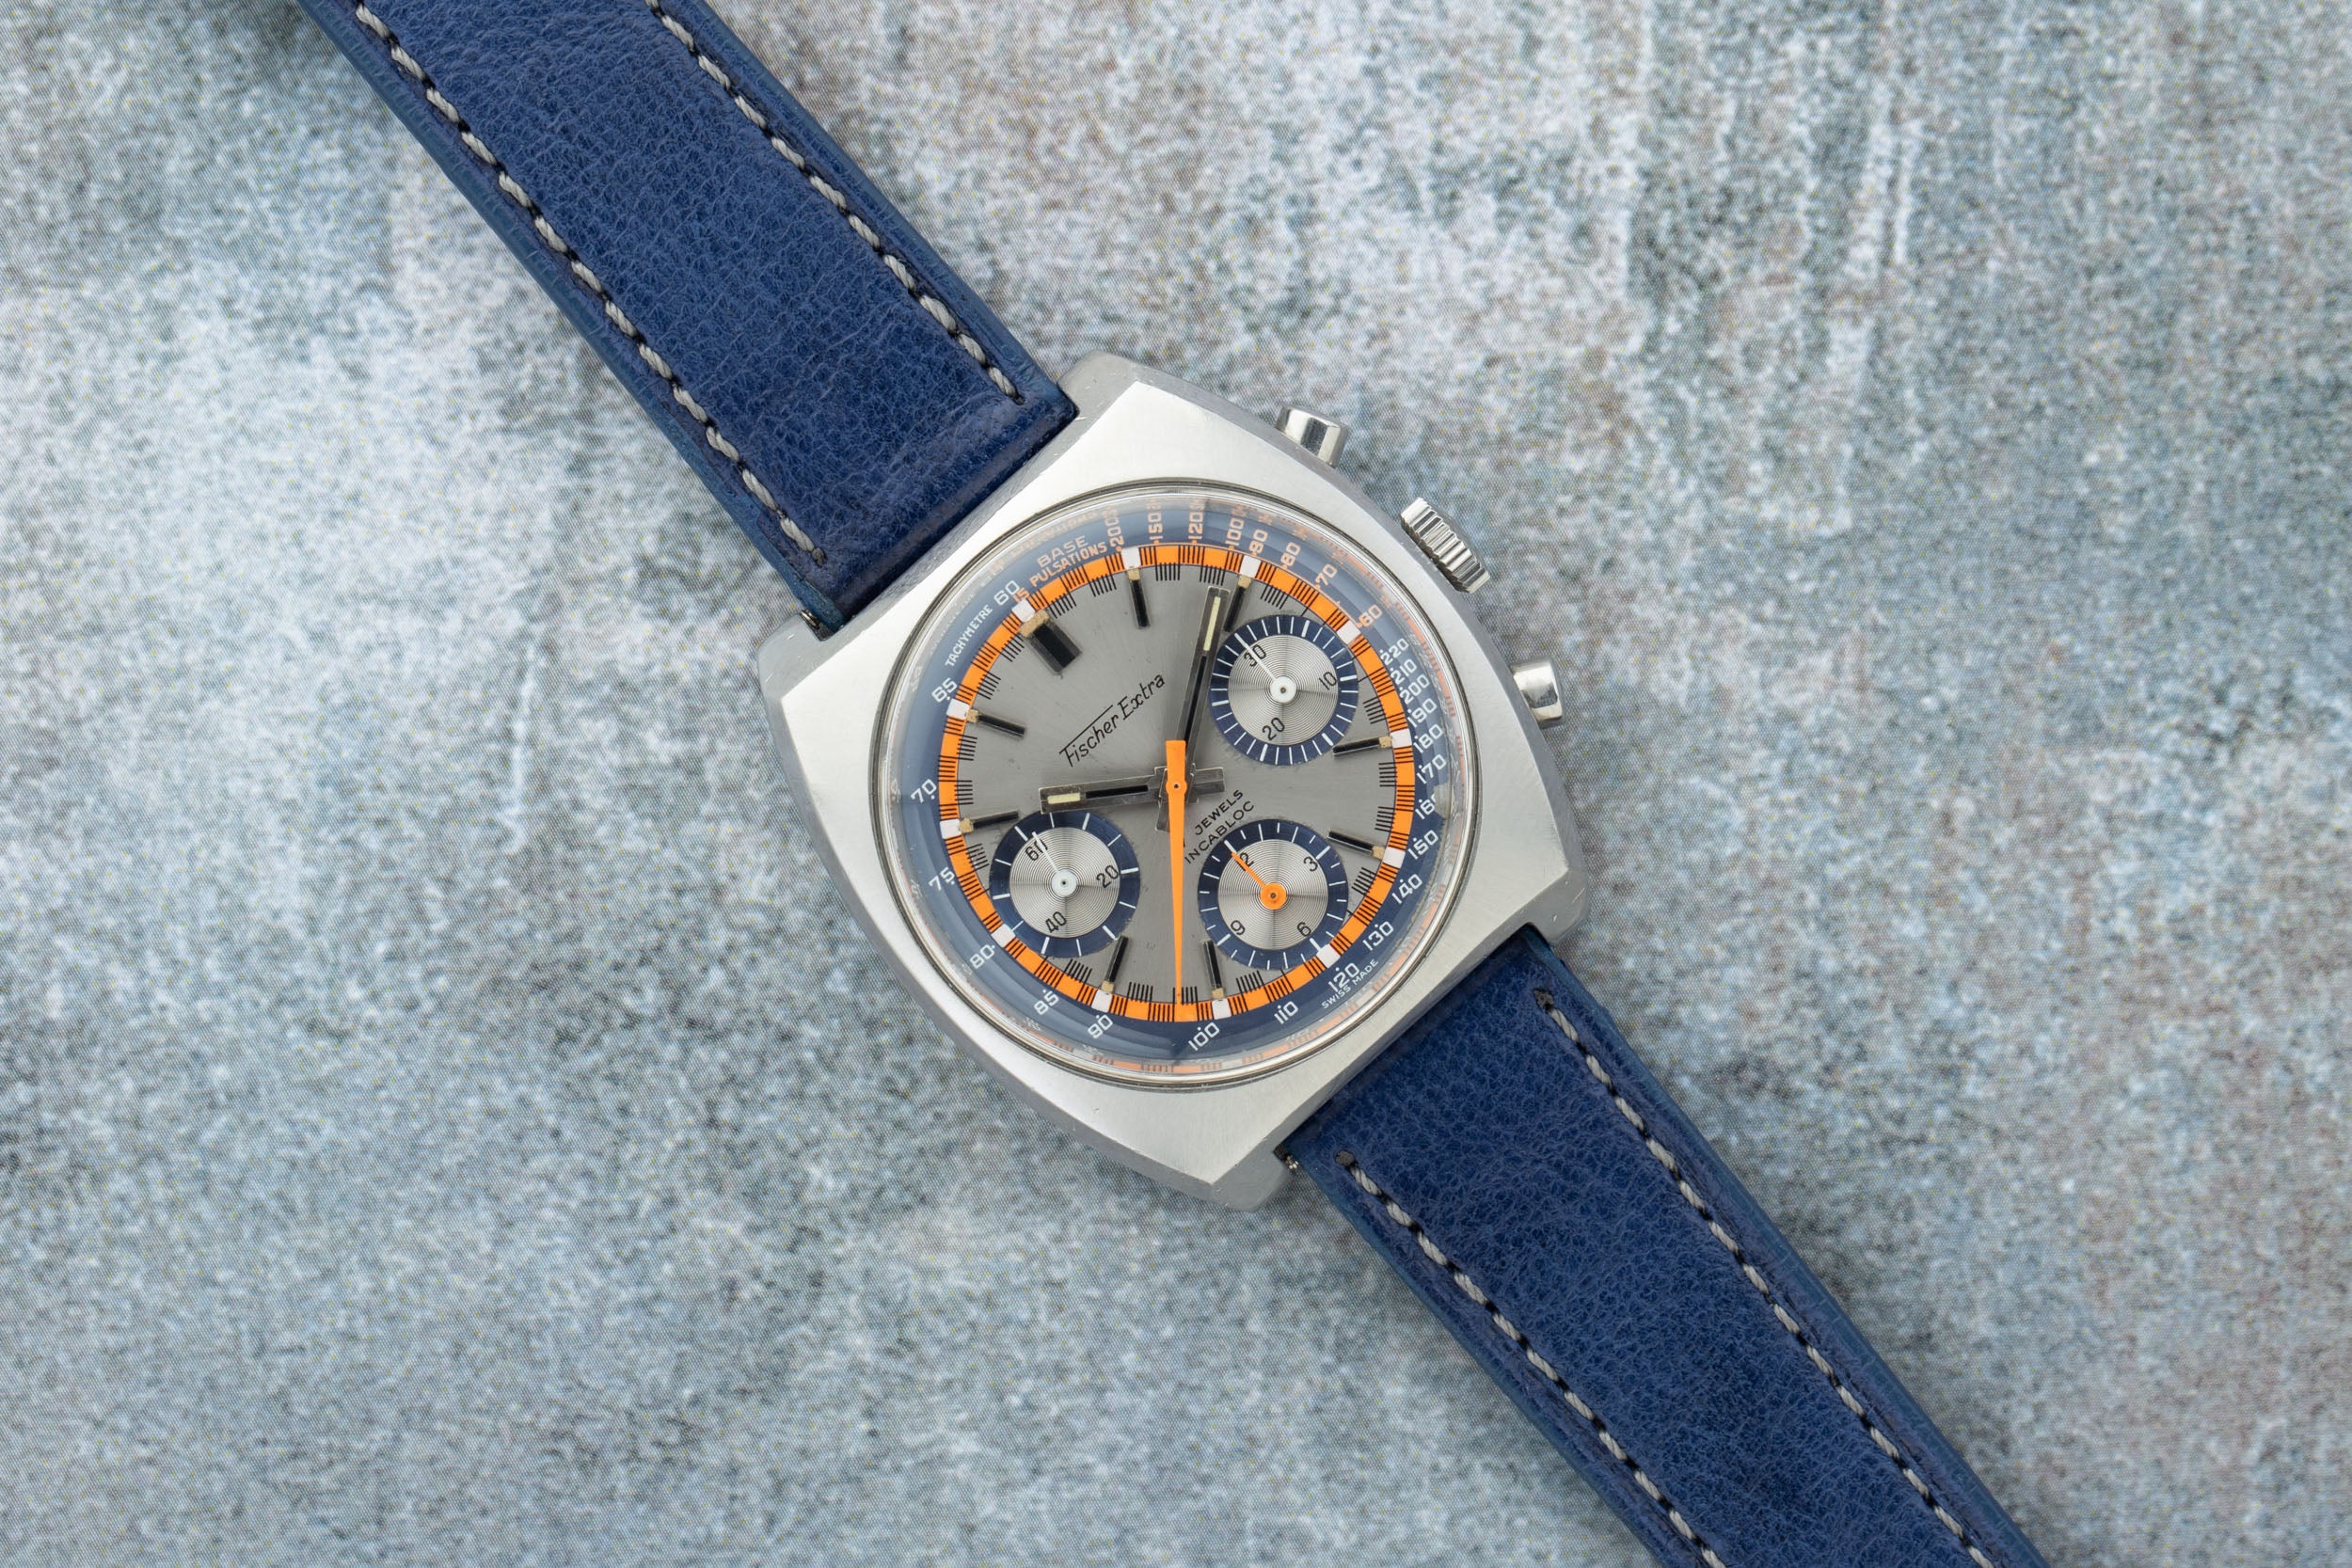 Fischer Extra 'Exotic' Dial Chronograph